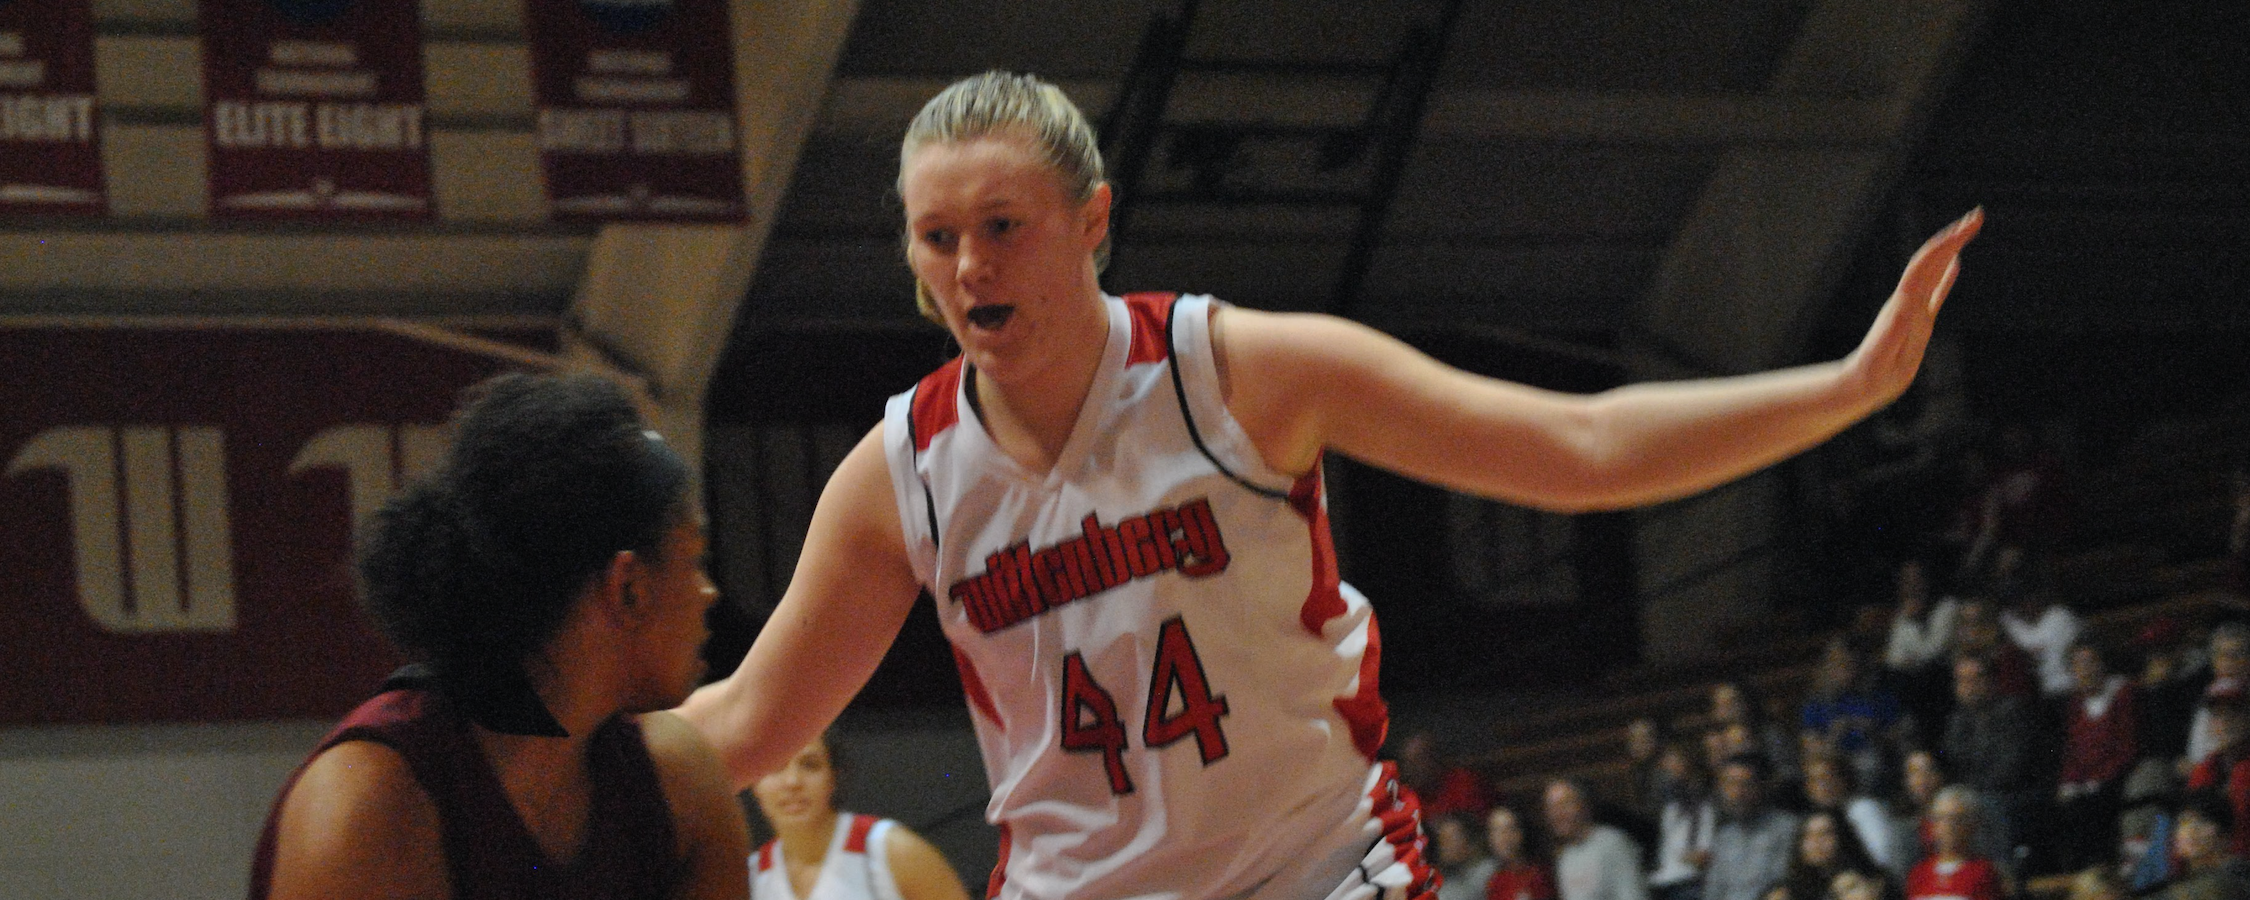 Wittenberg Drops Overtime Thriller to OWU